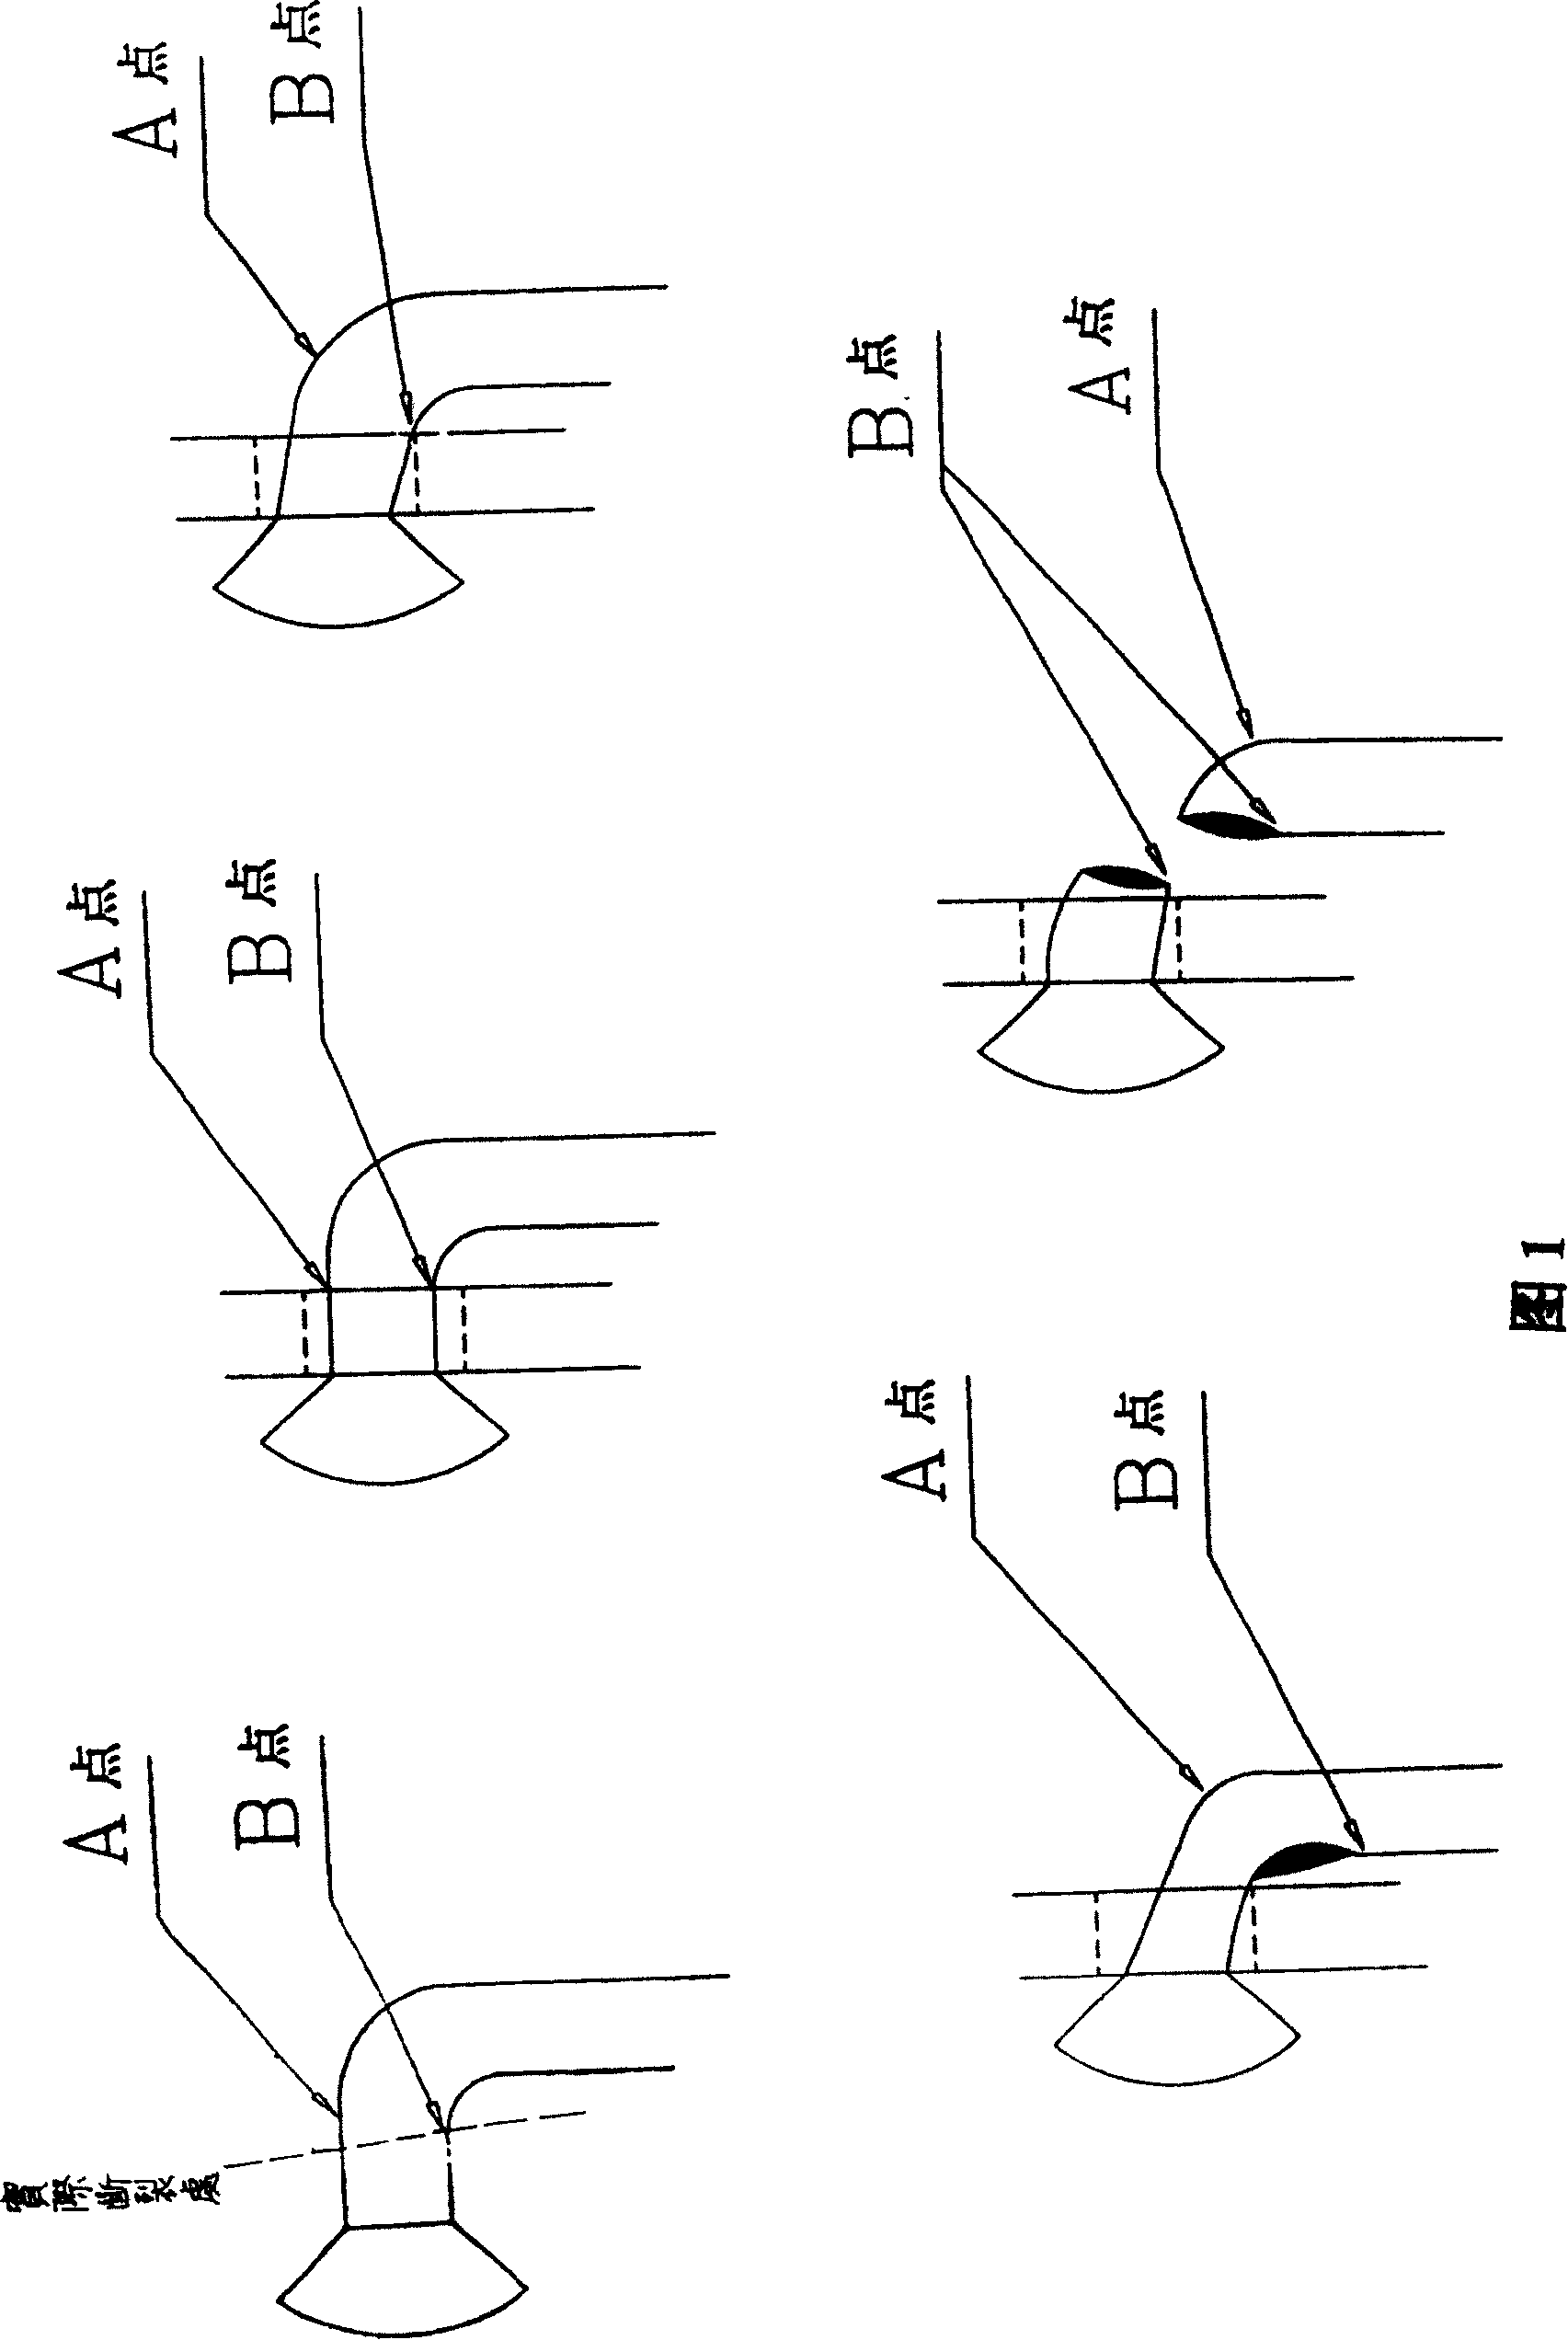 Method for reinforcing spoke structural strength of bicycle and motor vehicle